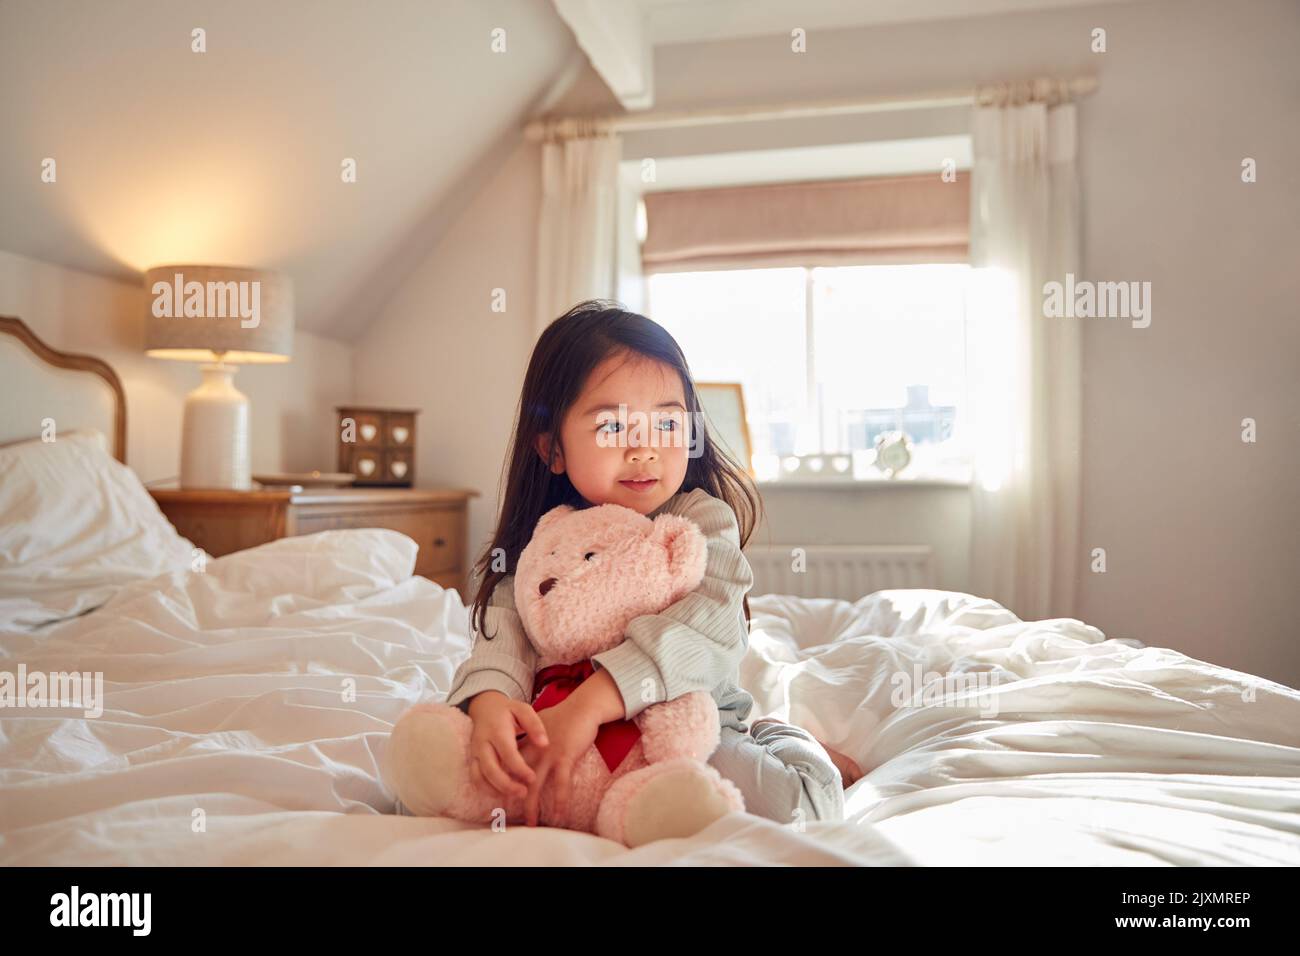 Young Girl Sitting On Bed Wearing Pyjamas At Home Cuddling Soft Toy Stock Photo